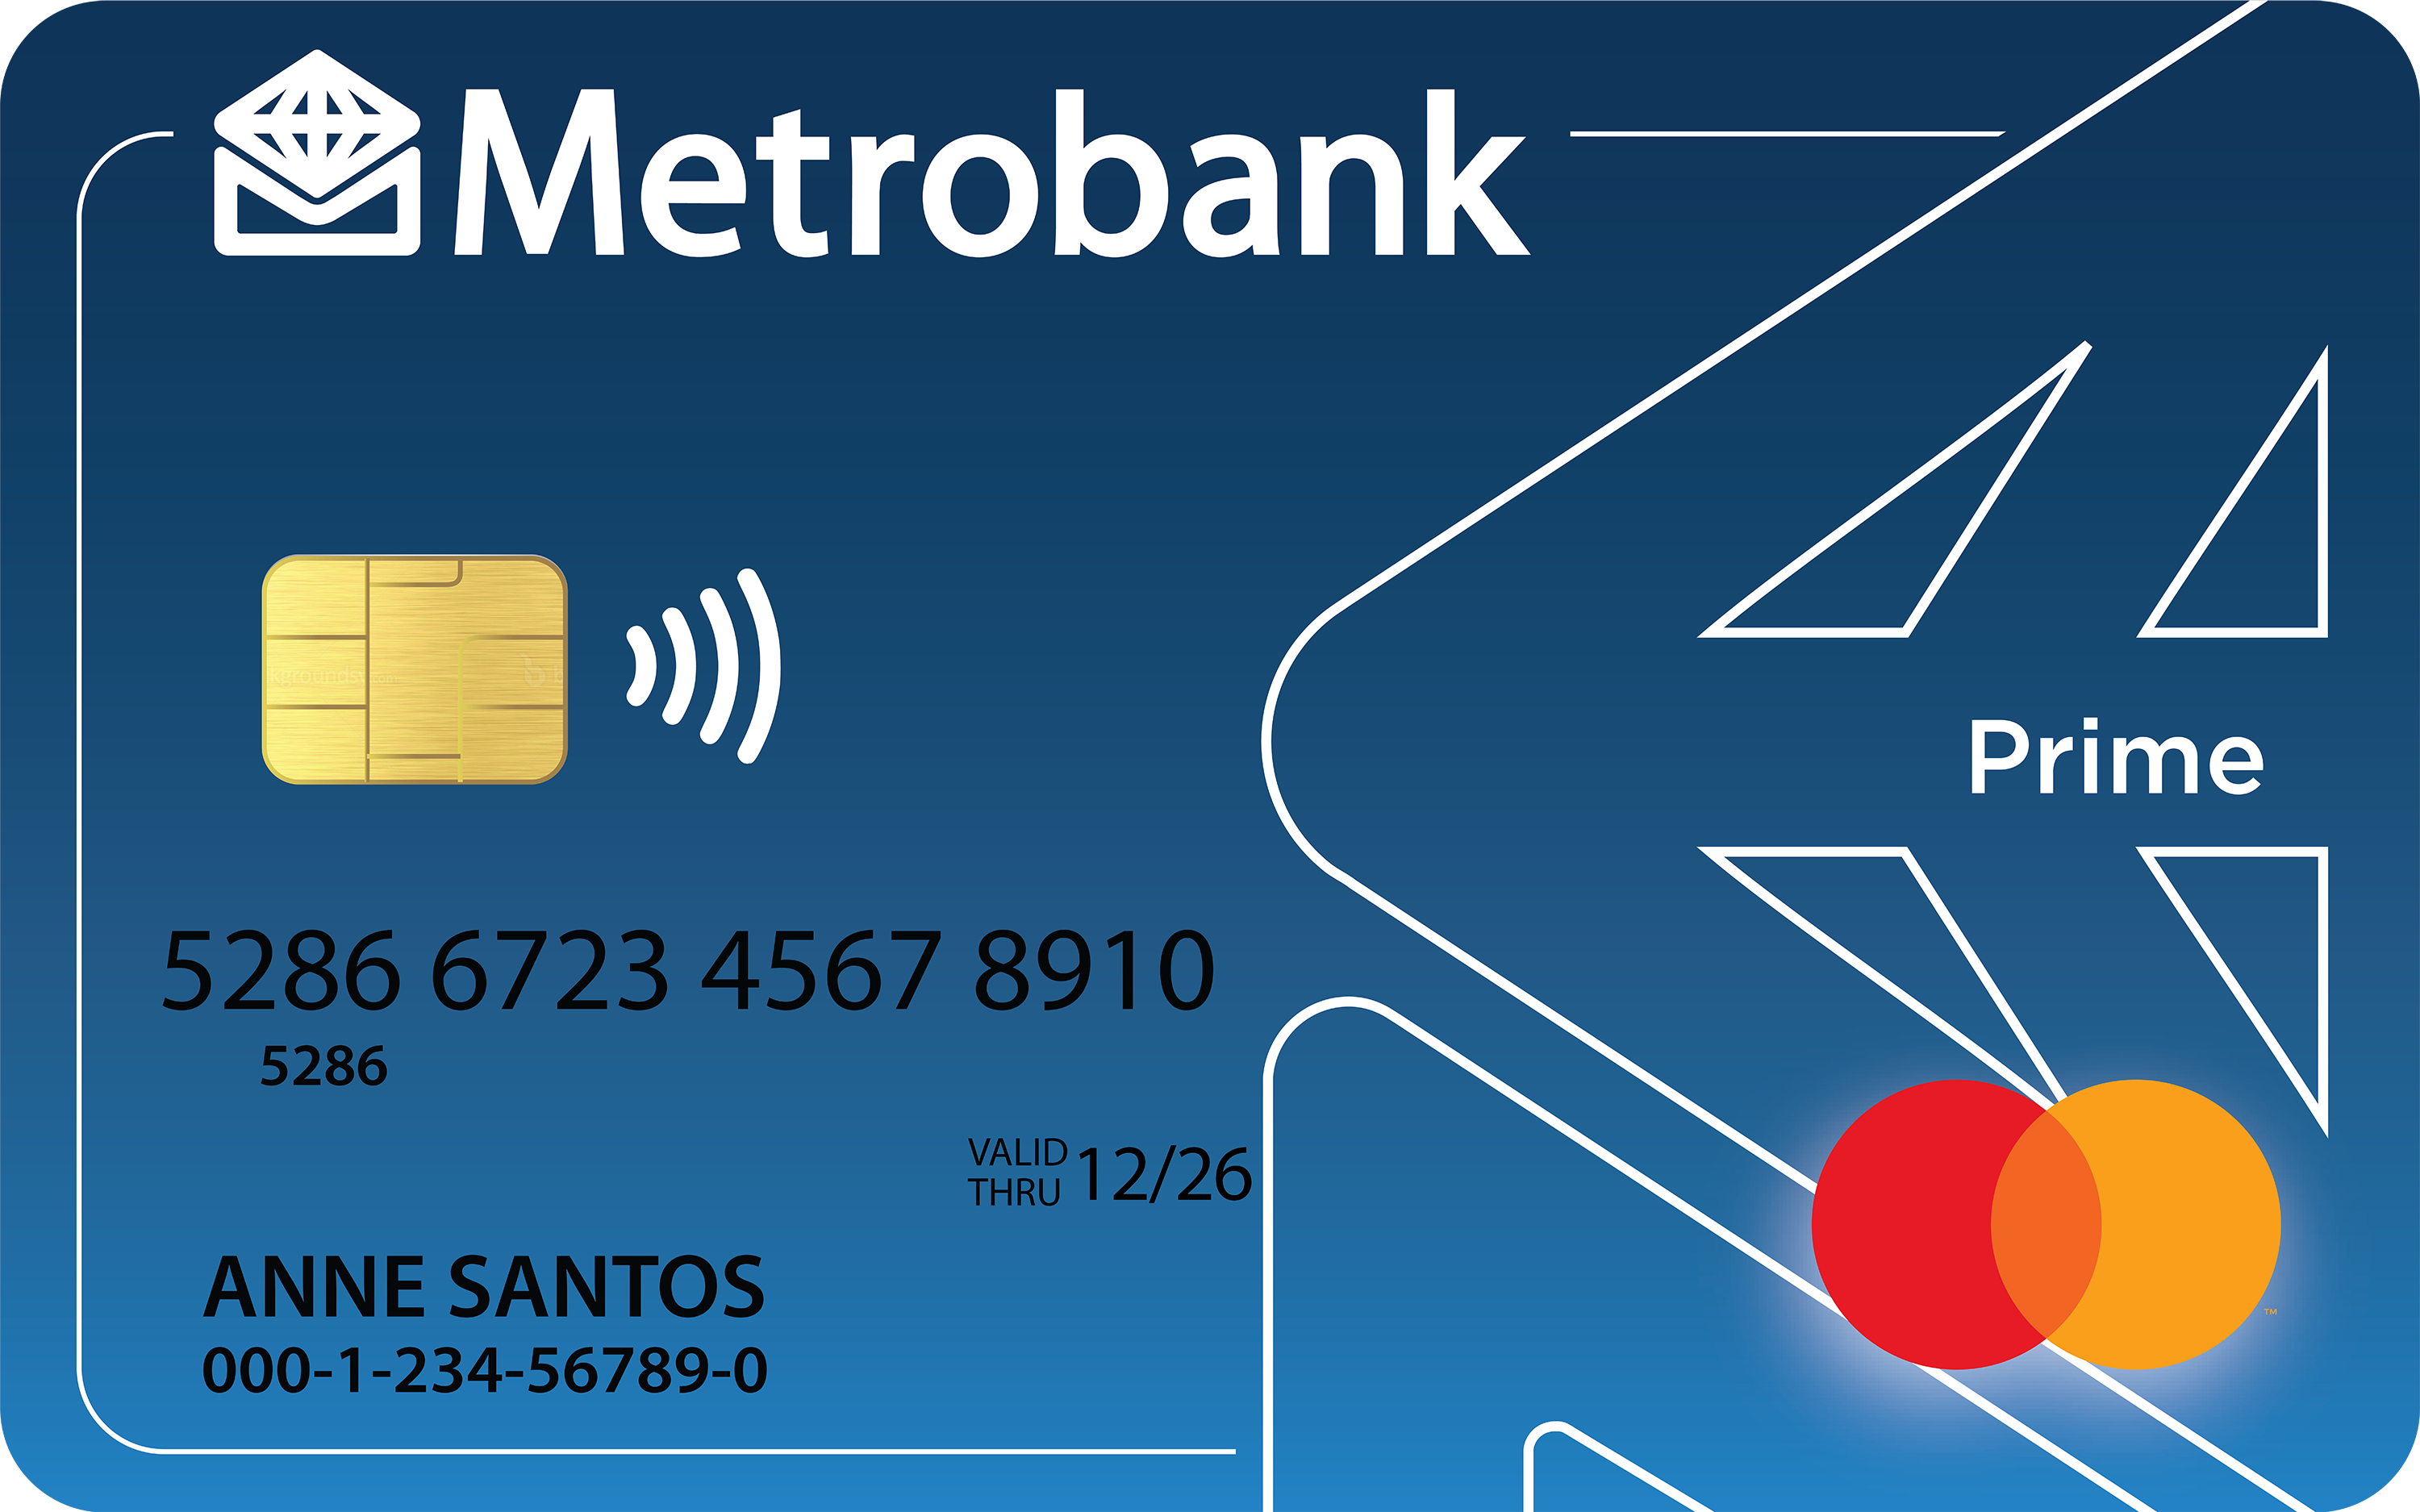 Metrobank Credit Card Promo: Save on McDonald's Delivery with Your Card - wide 7